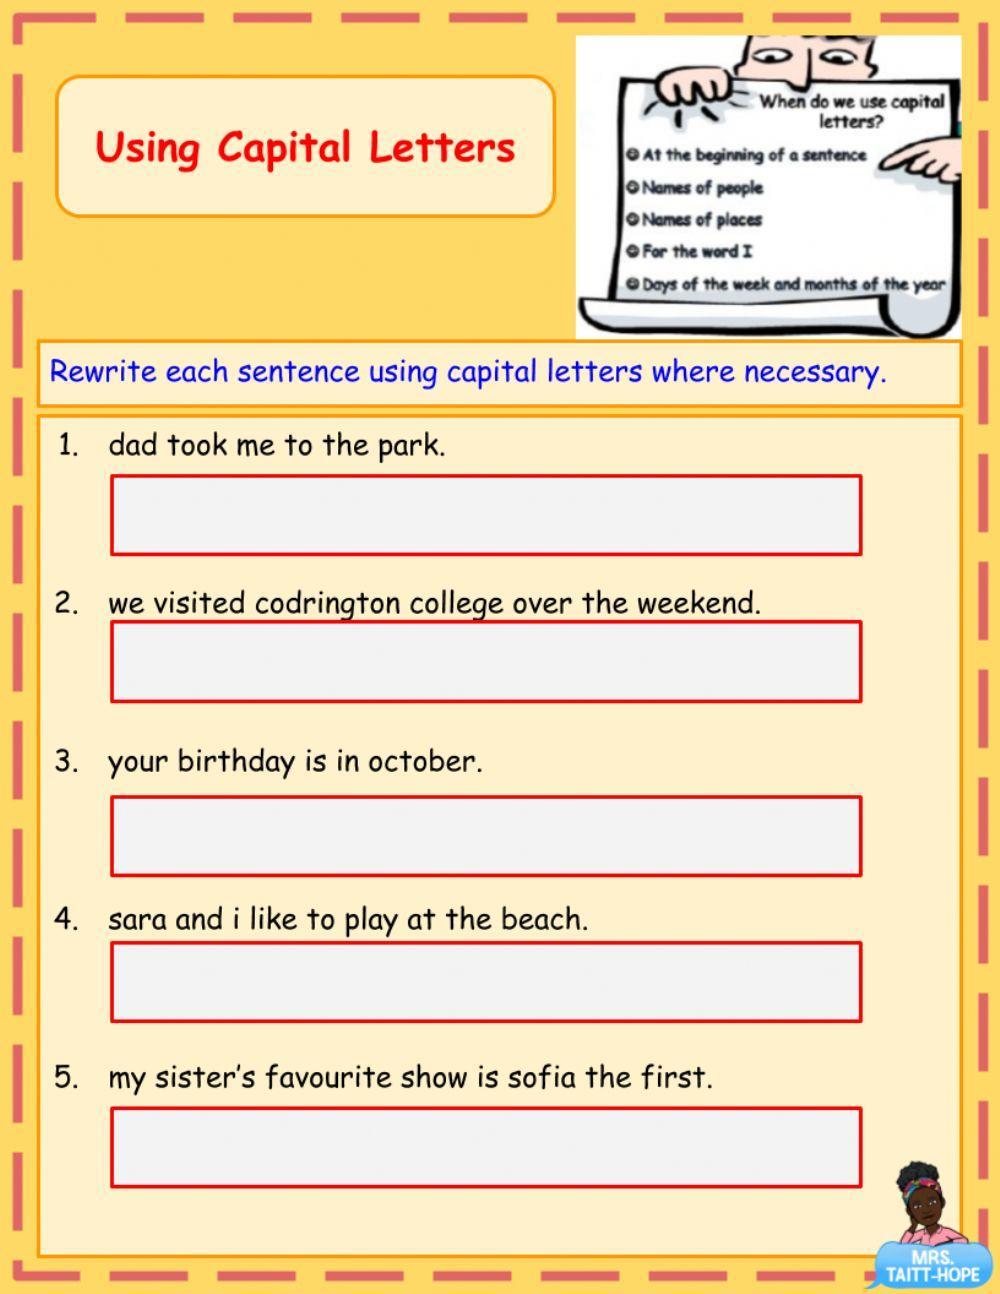 Using Capital Letters